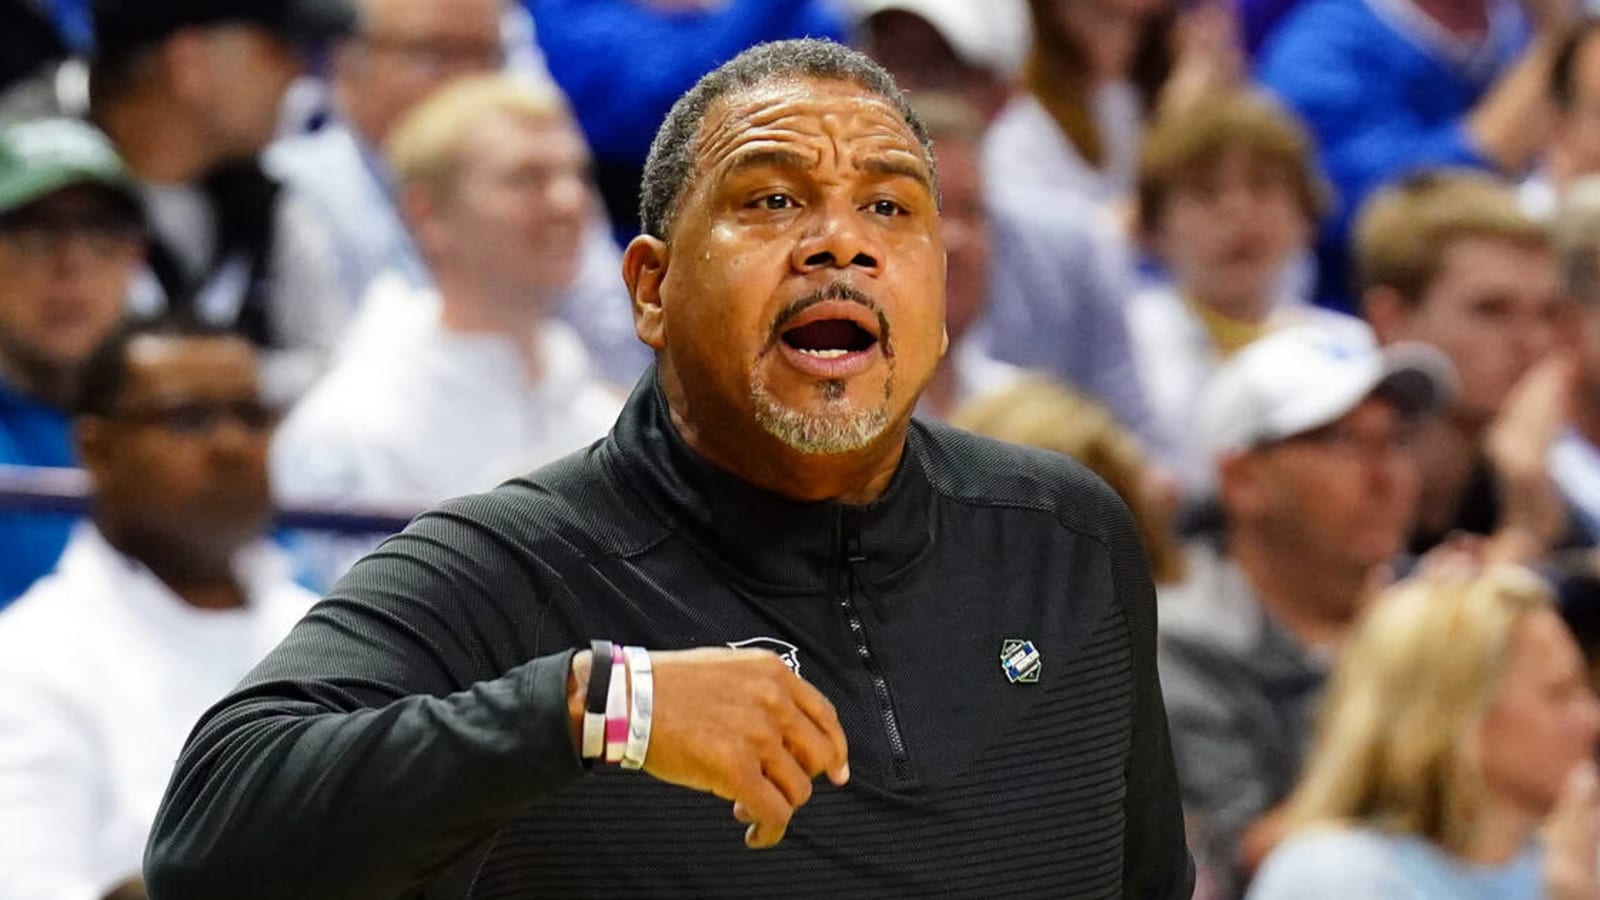 Ed Cooley vows to move Georgetown forward